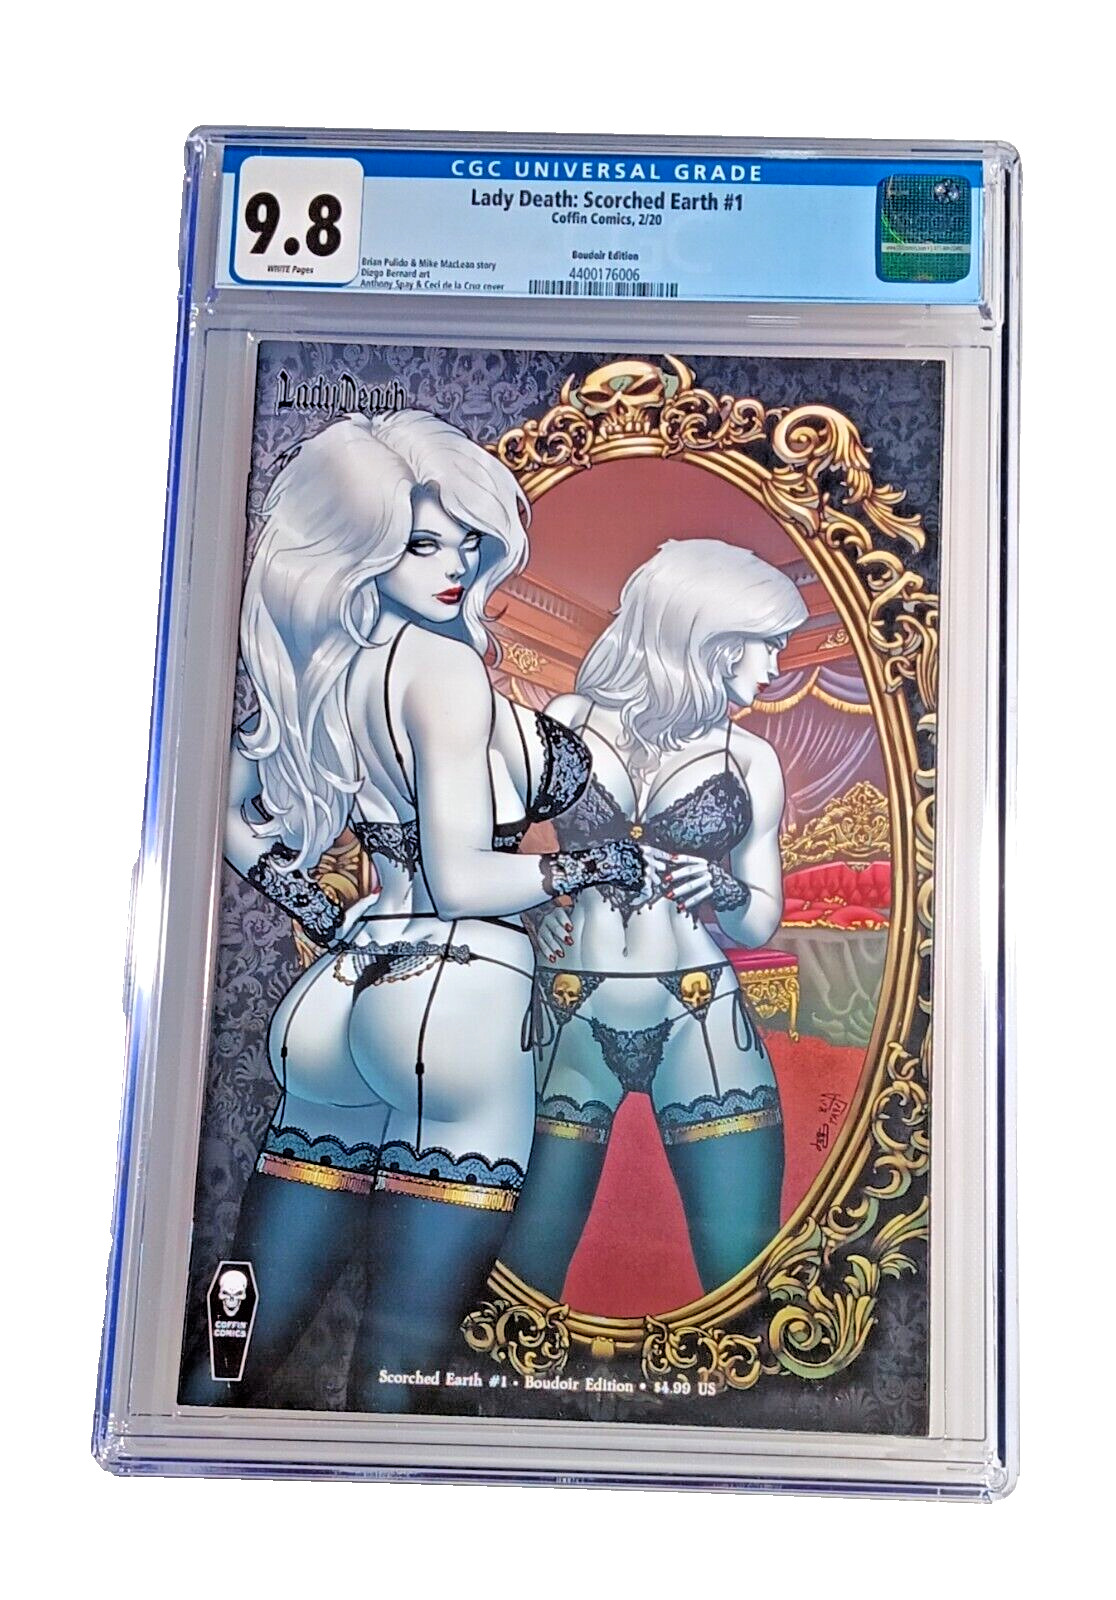 LADY DEATH: SCORCHED EARTH #1 CGC 9.8 BOUDOIR Edition COFFIN 2020